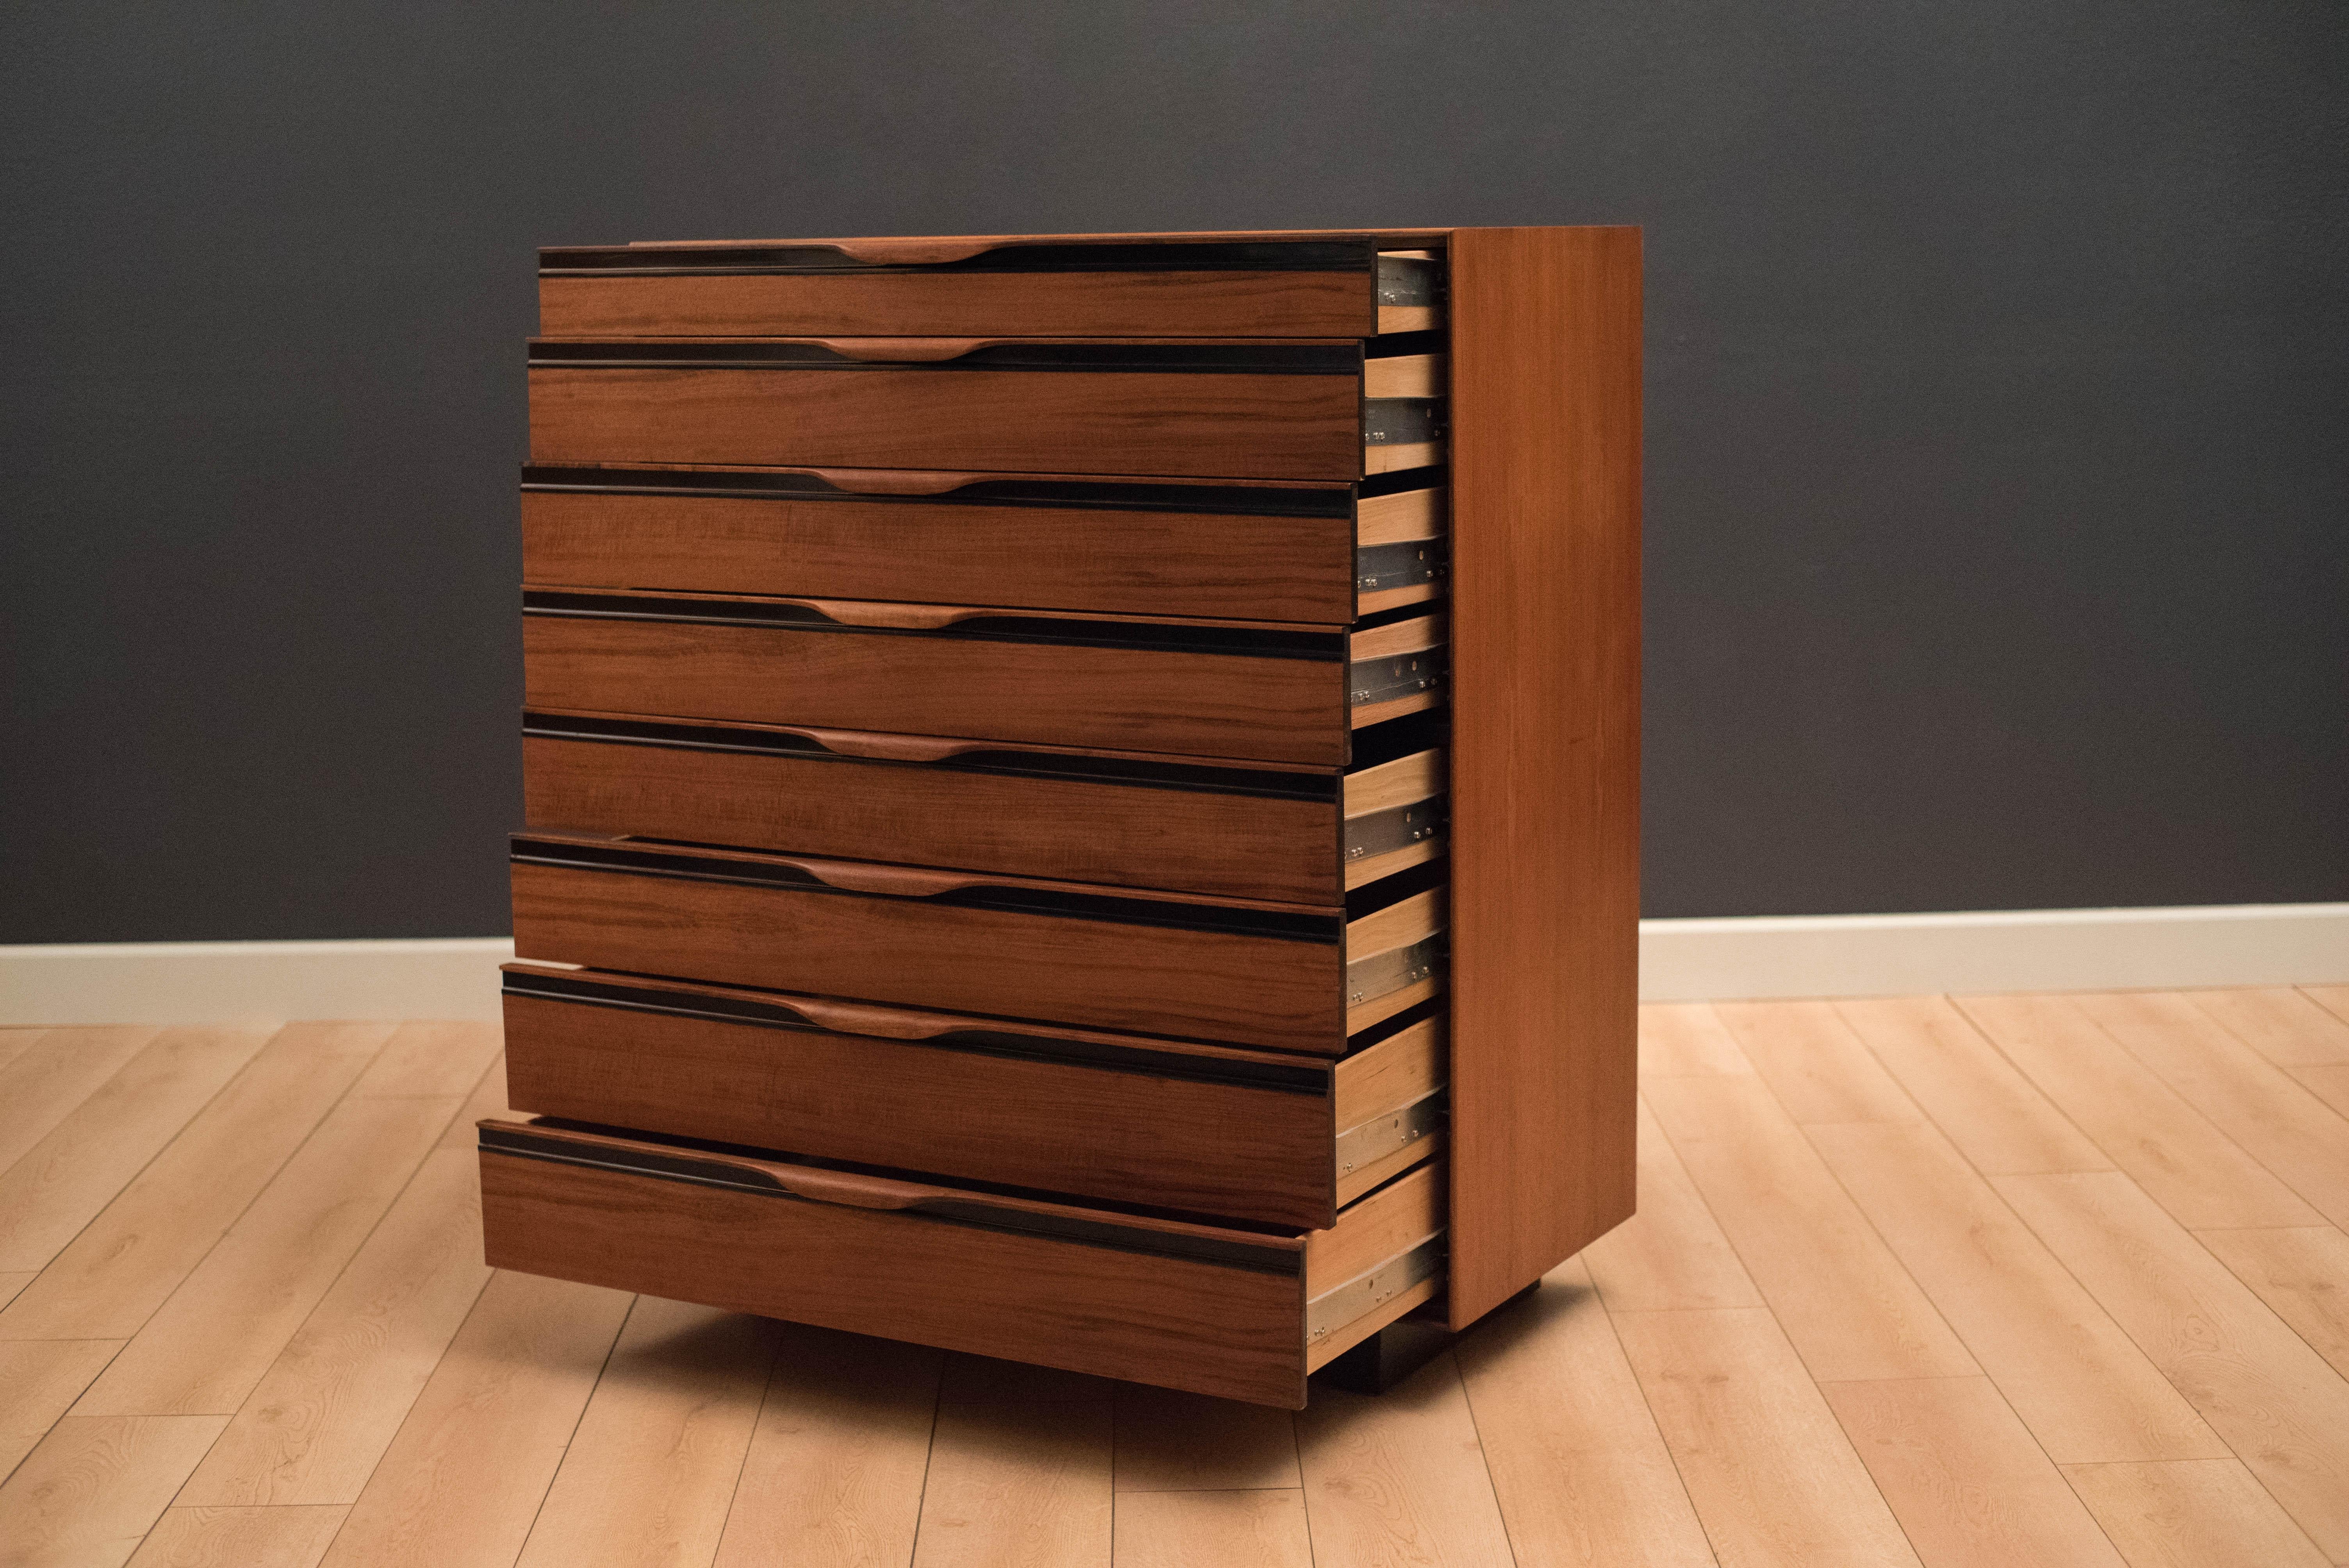 Mid-Century Modern highboy dresser chest designed by John Kapel for Glenn of California in walnut. This piece is equipped with eight storage drawers that glide smoothly on metal slides. Includes four adjustable drawer dividers.